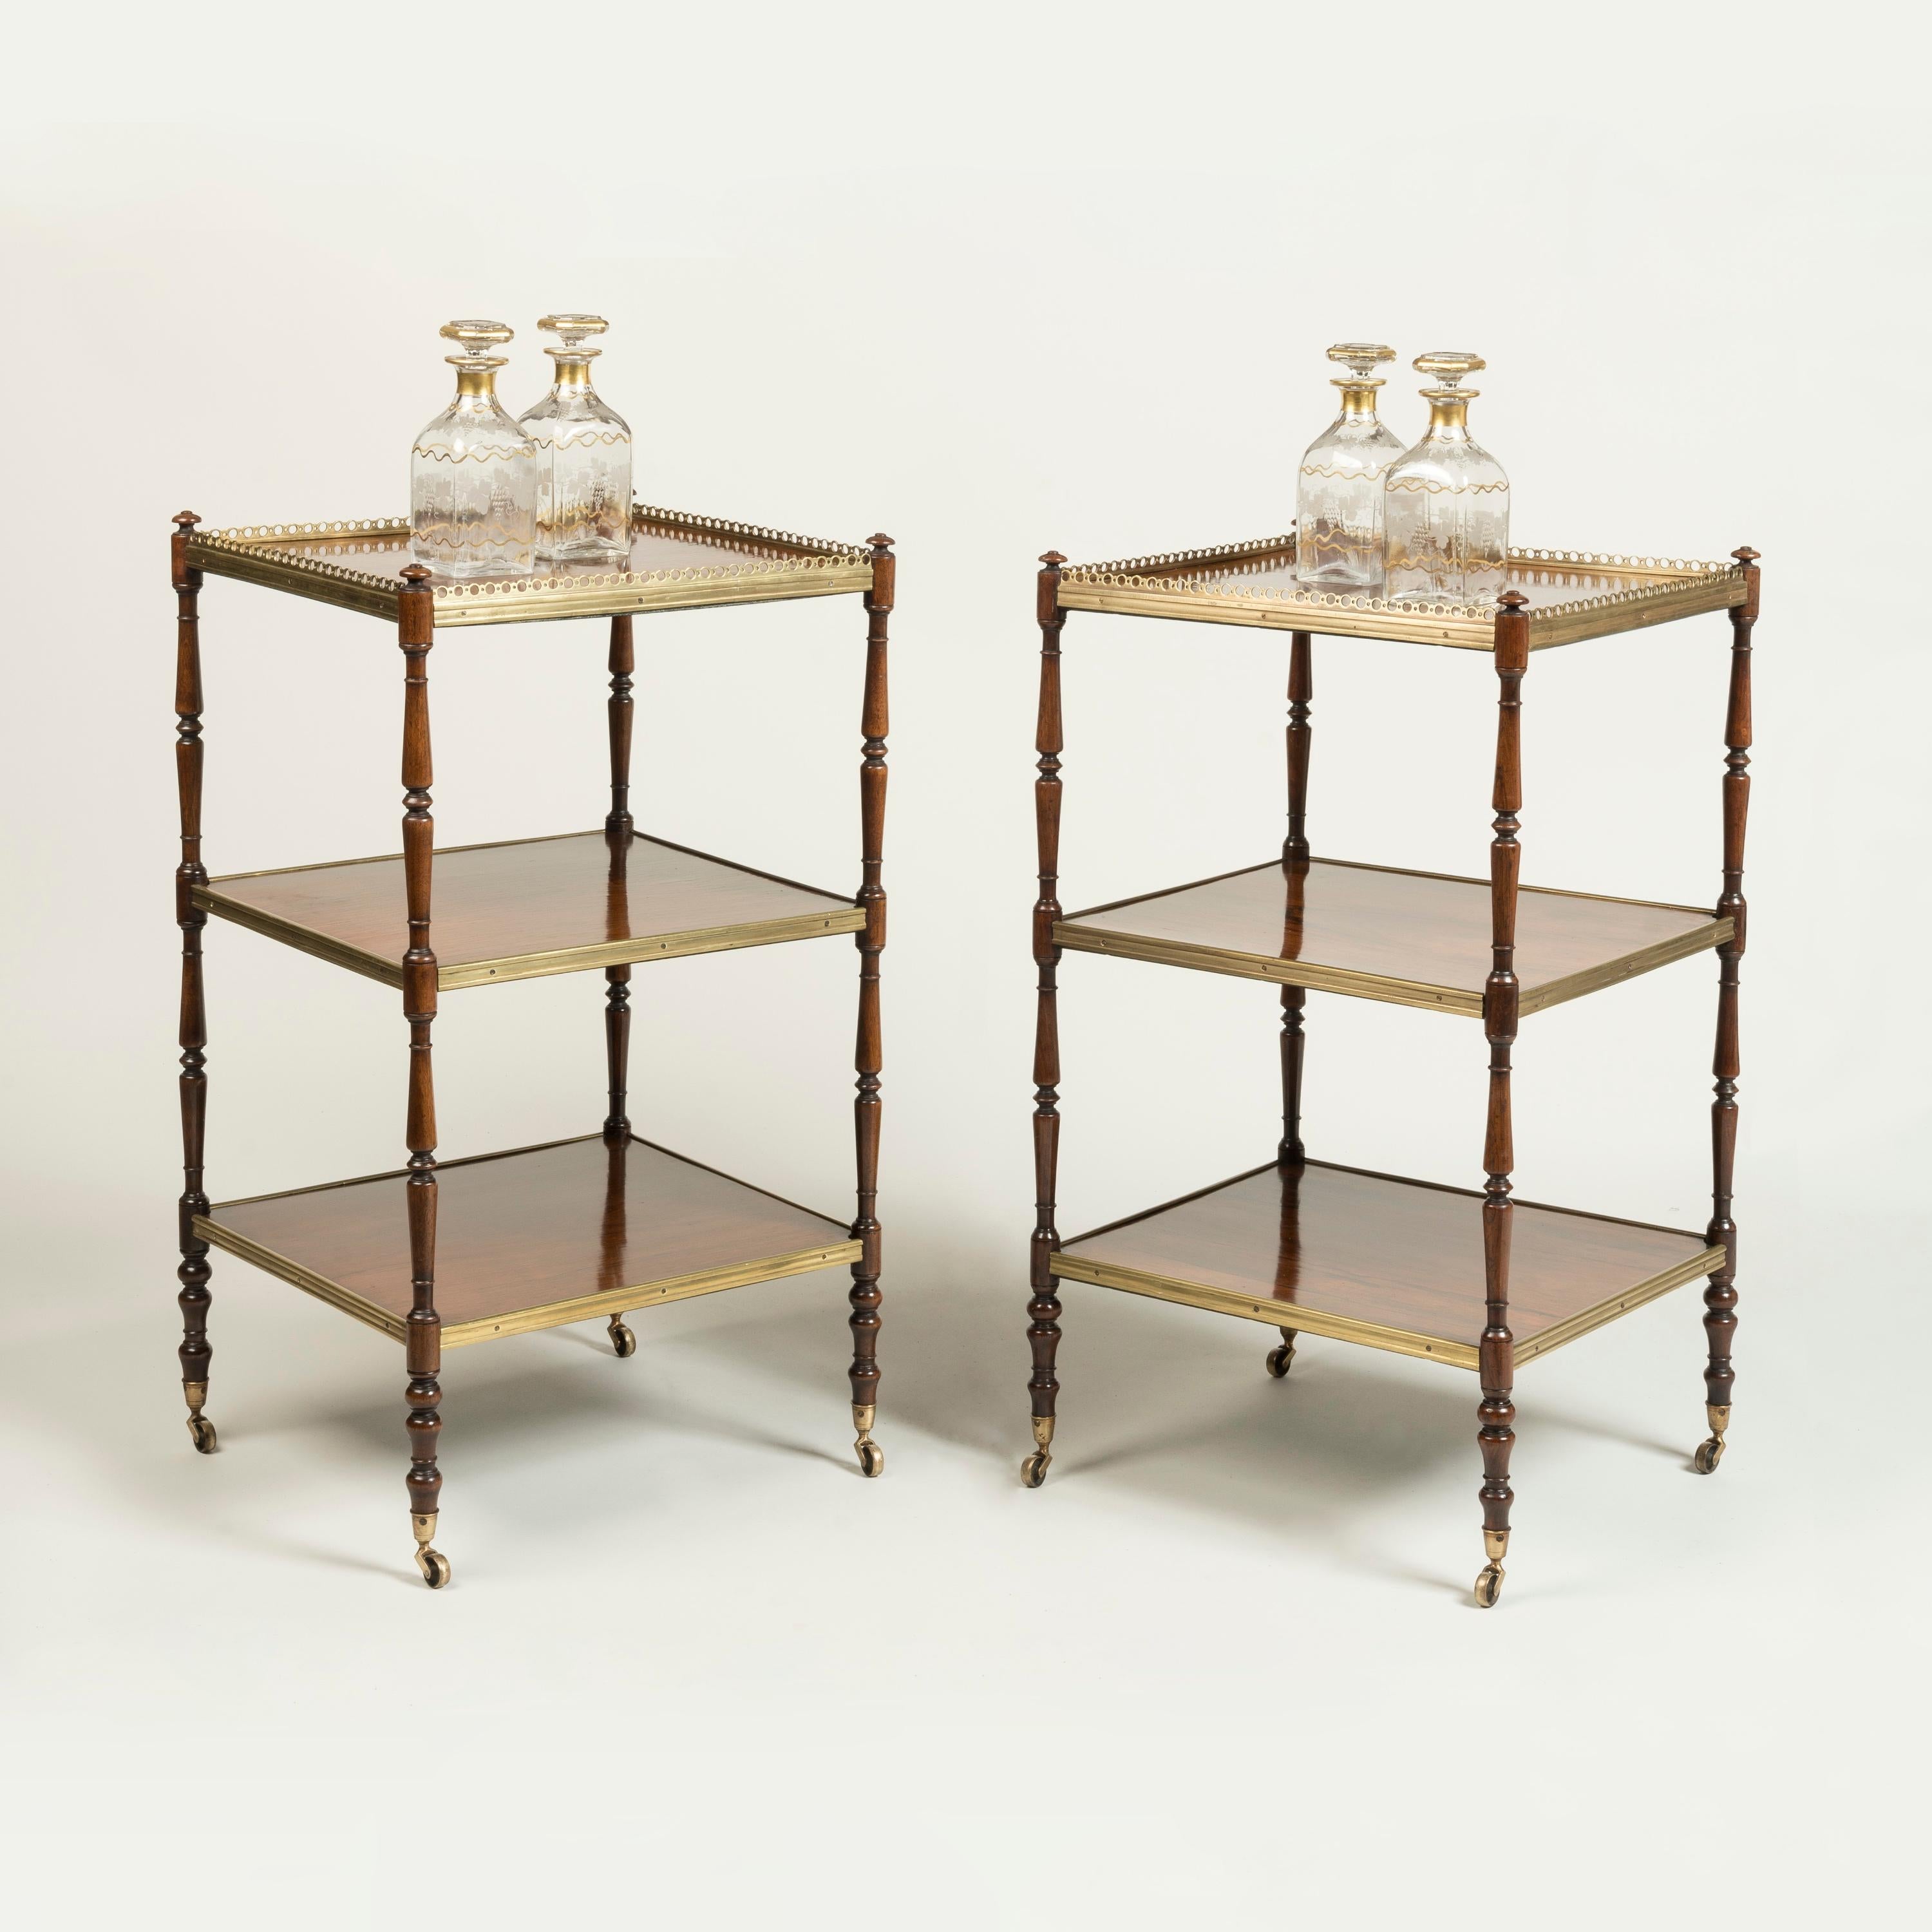 English Pair of 19th Century Regency Period Rosewood Étagère End Tables For Sale